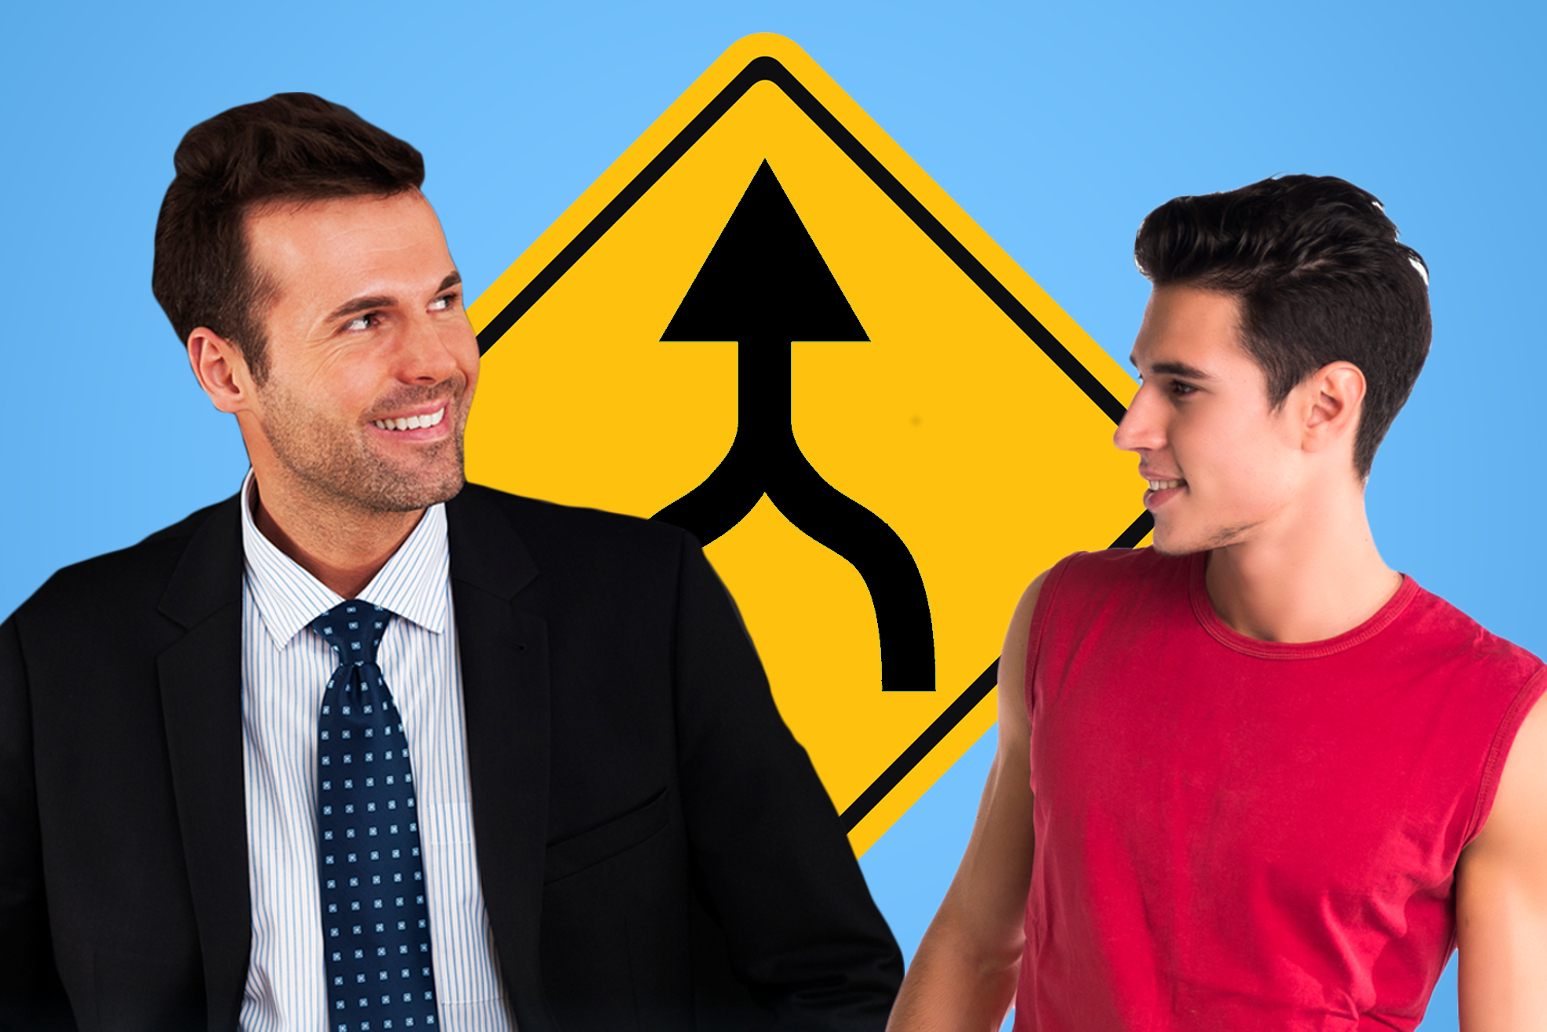 Middle-aged man in suit with younger guy in t-shirt in front of a merge sign